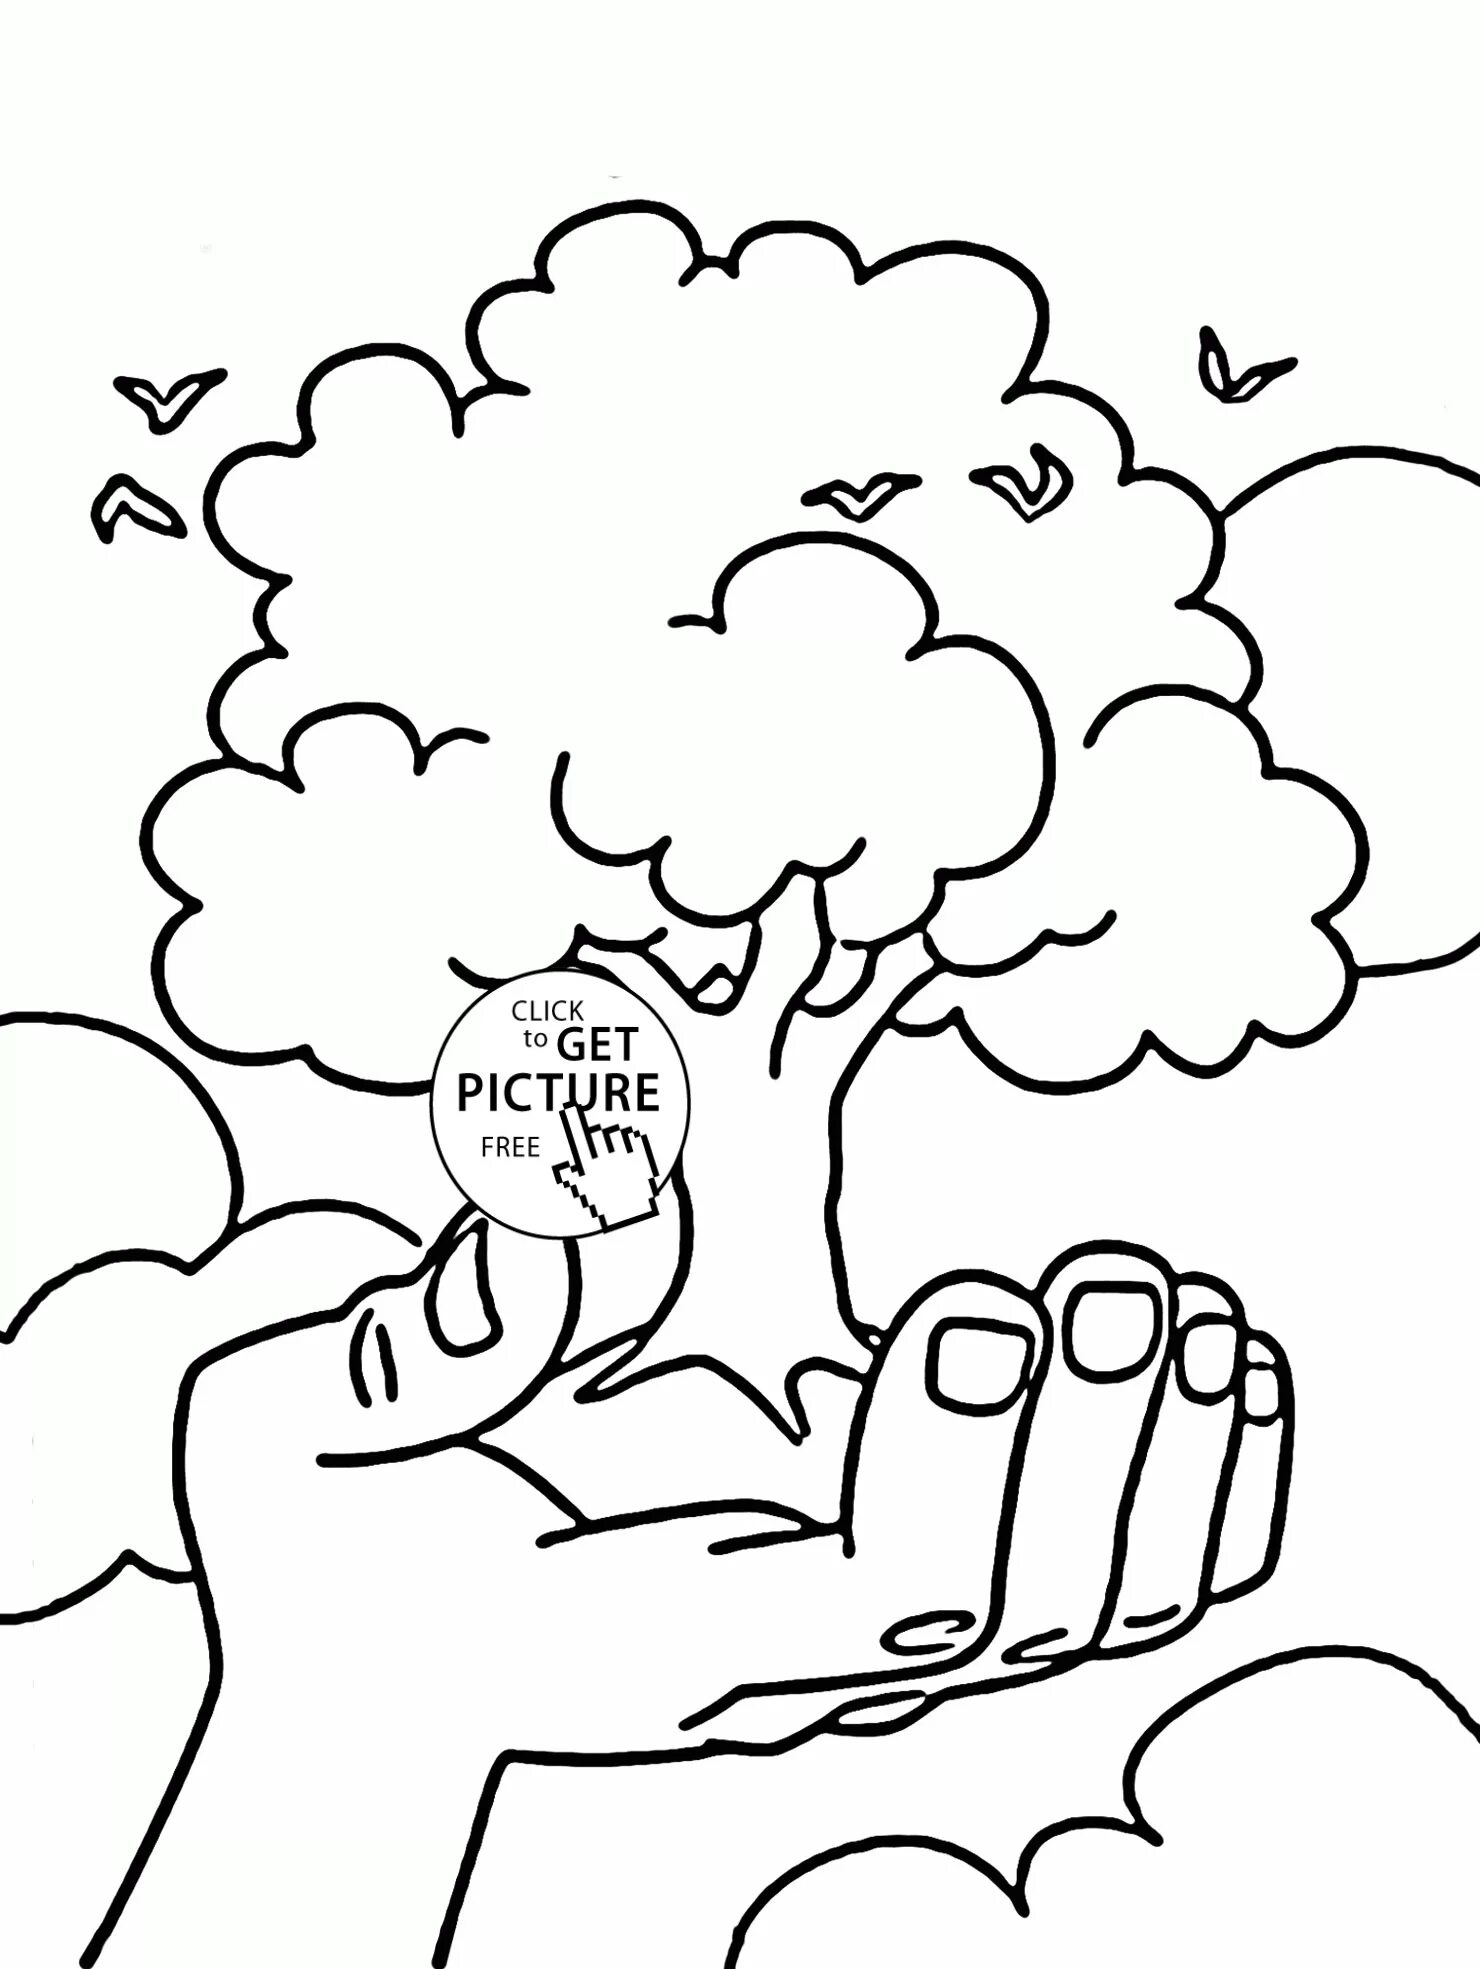 Attractive 'take care of nature' themed coloring page